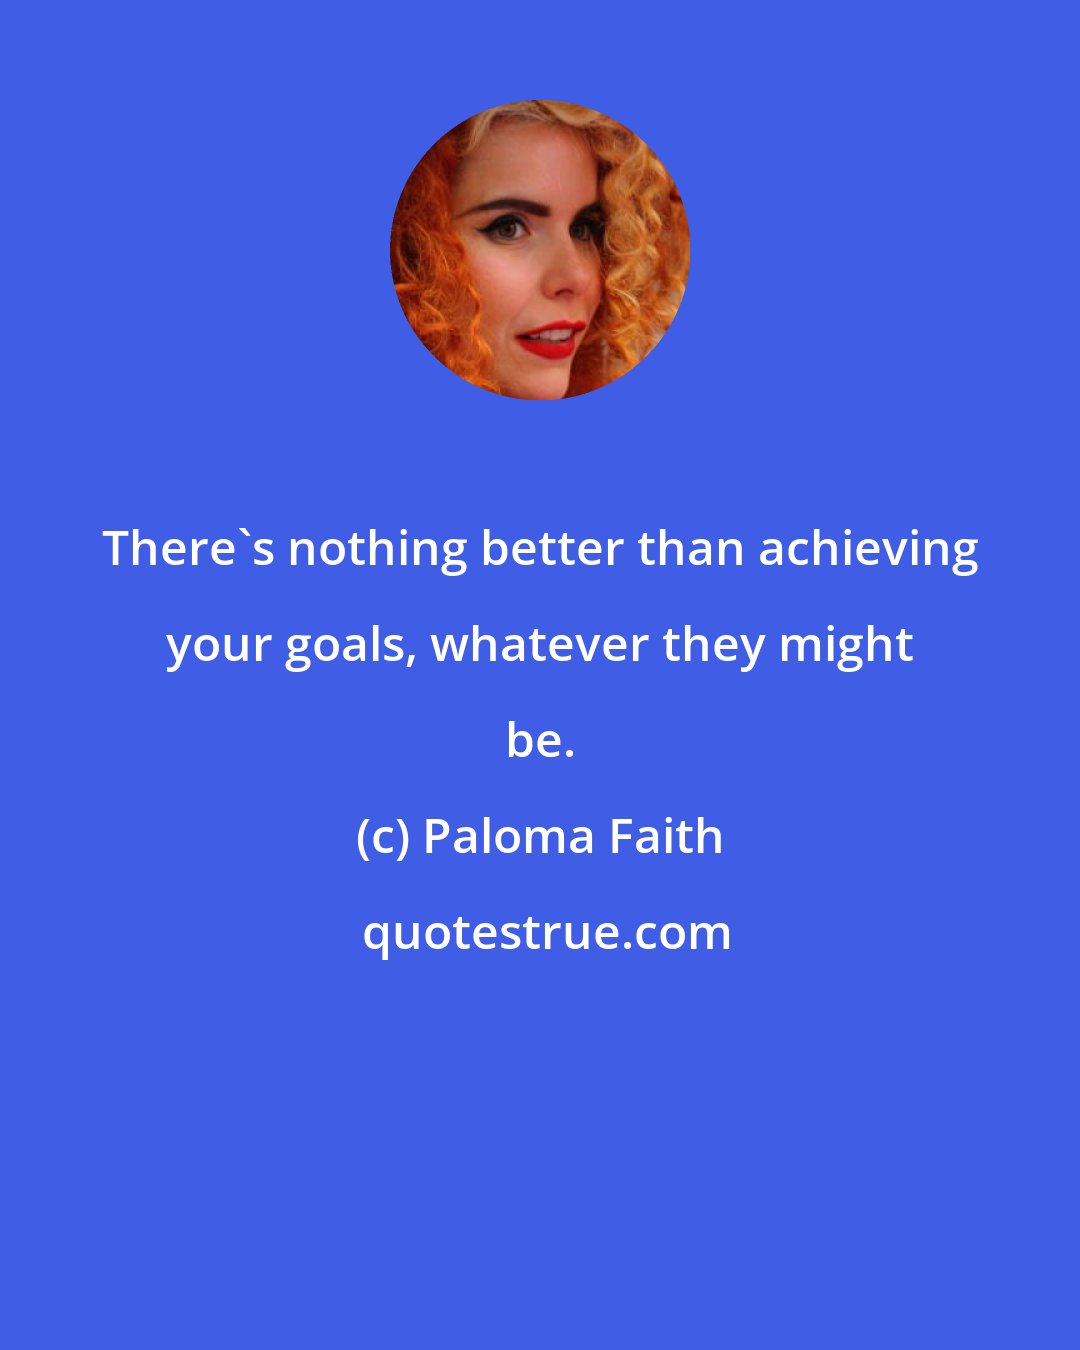 Paloma Faith: There's nothing better than achieving your goals, whatever they might be.